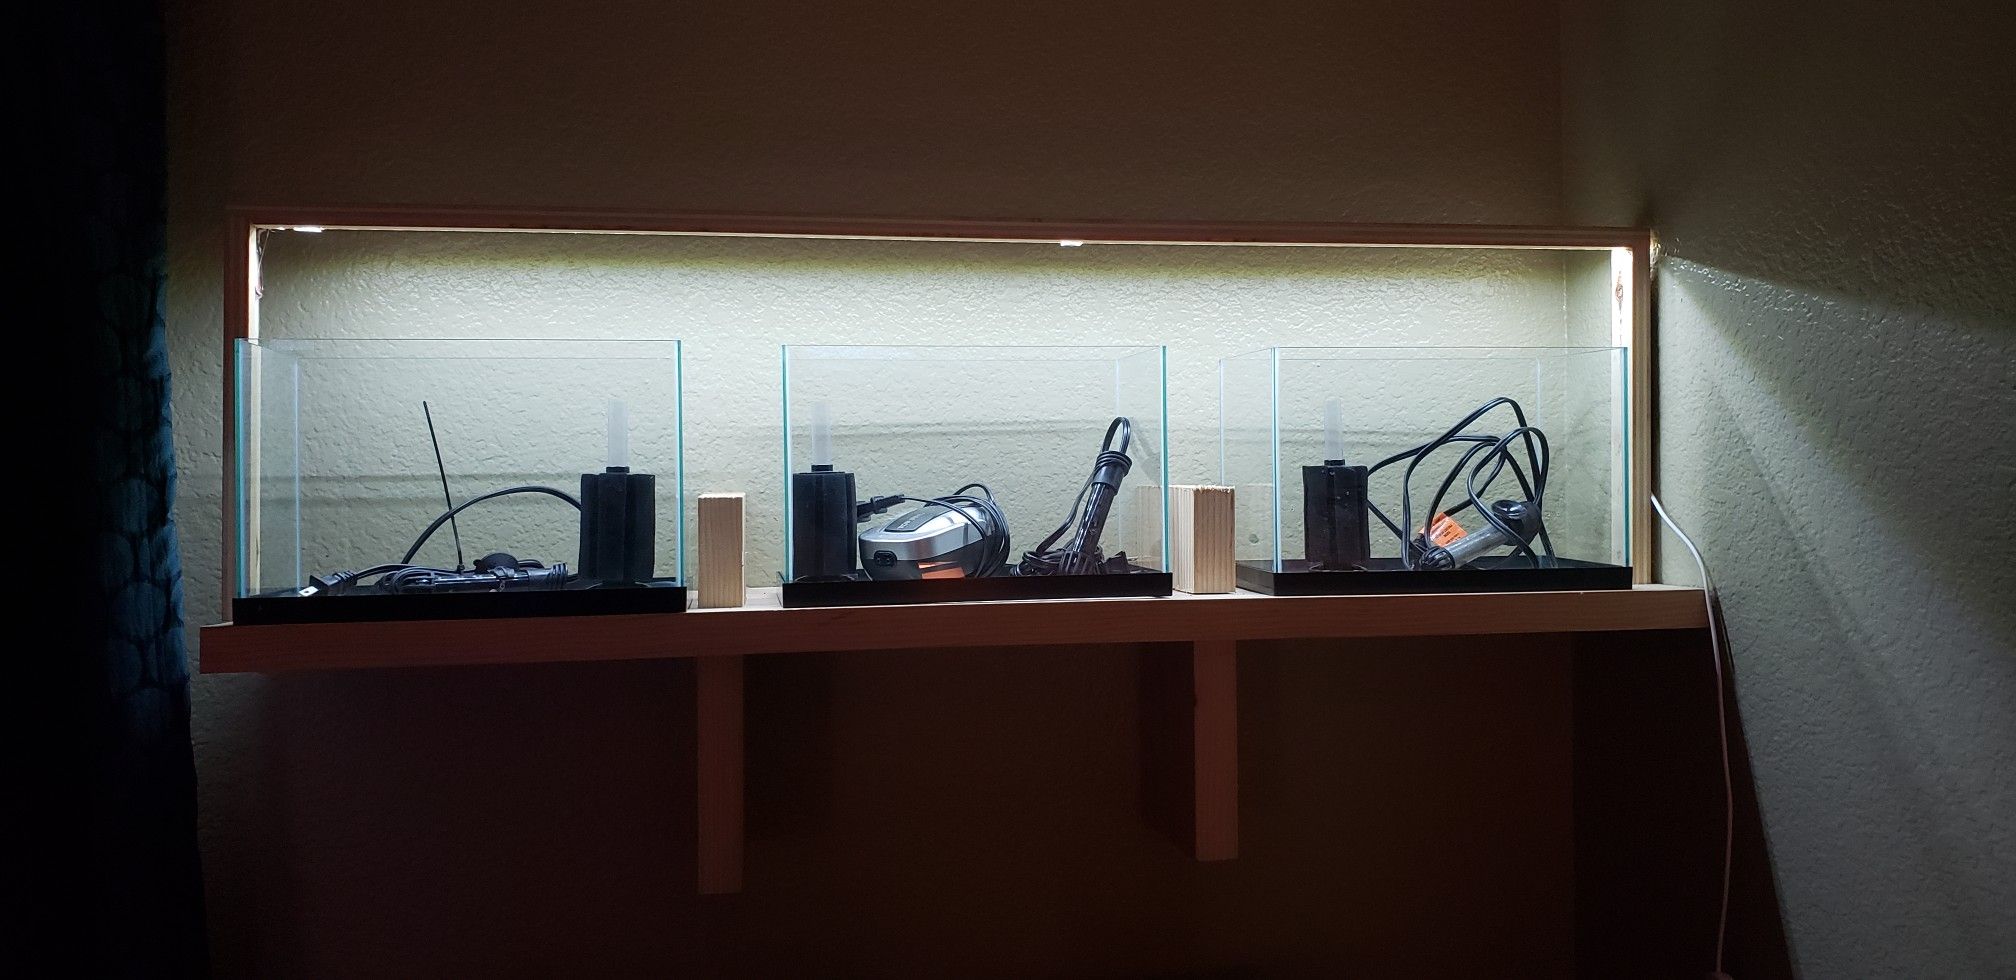 3, 2.5 gallon rimless aquariums with wall mounted shelf and dimmable LED light